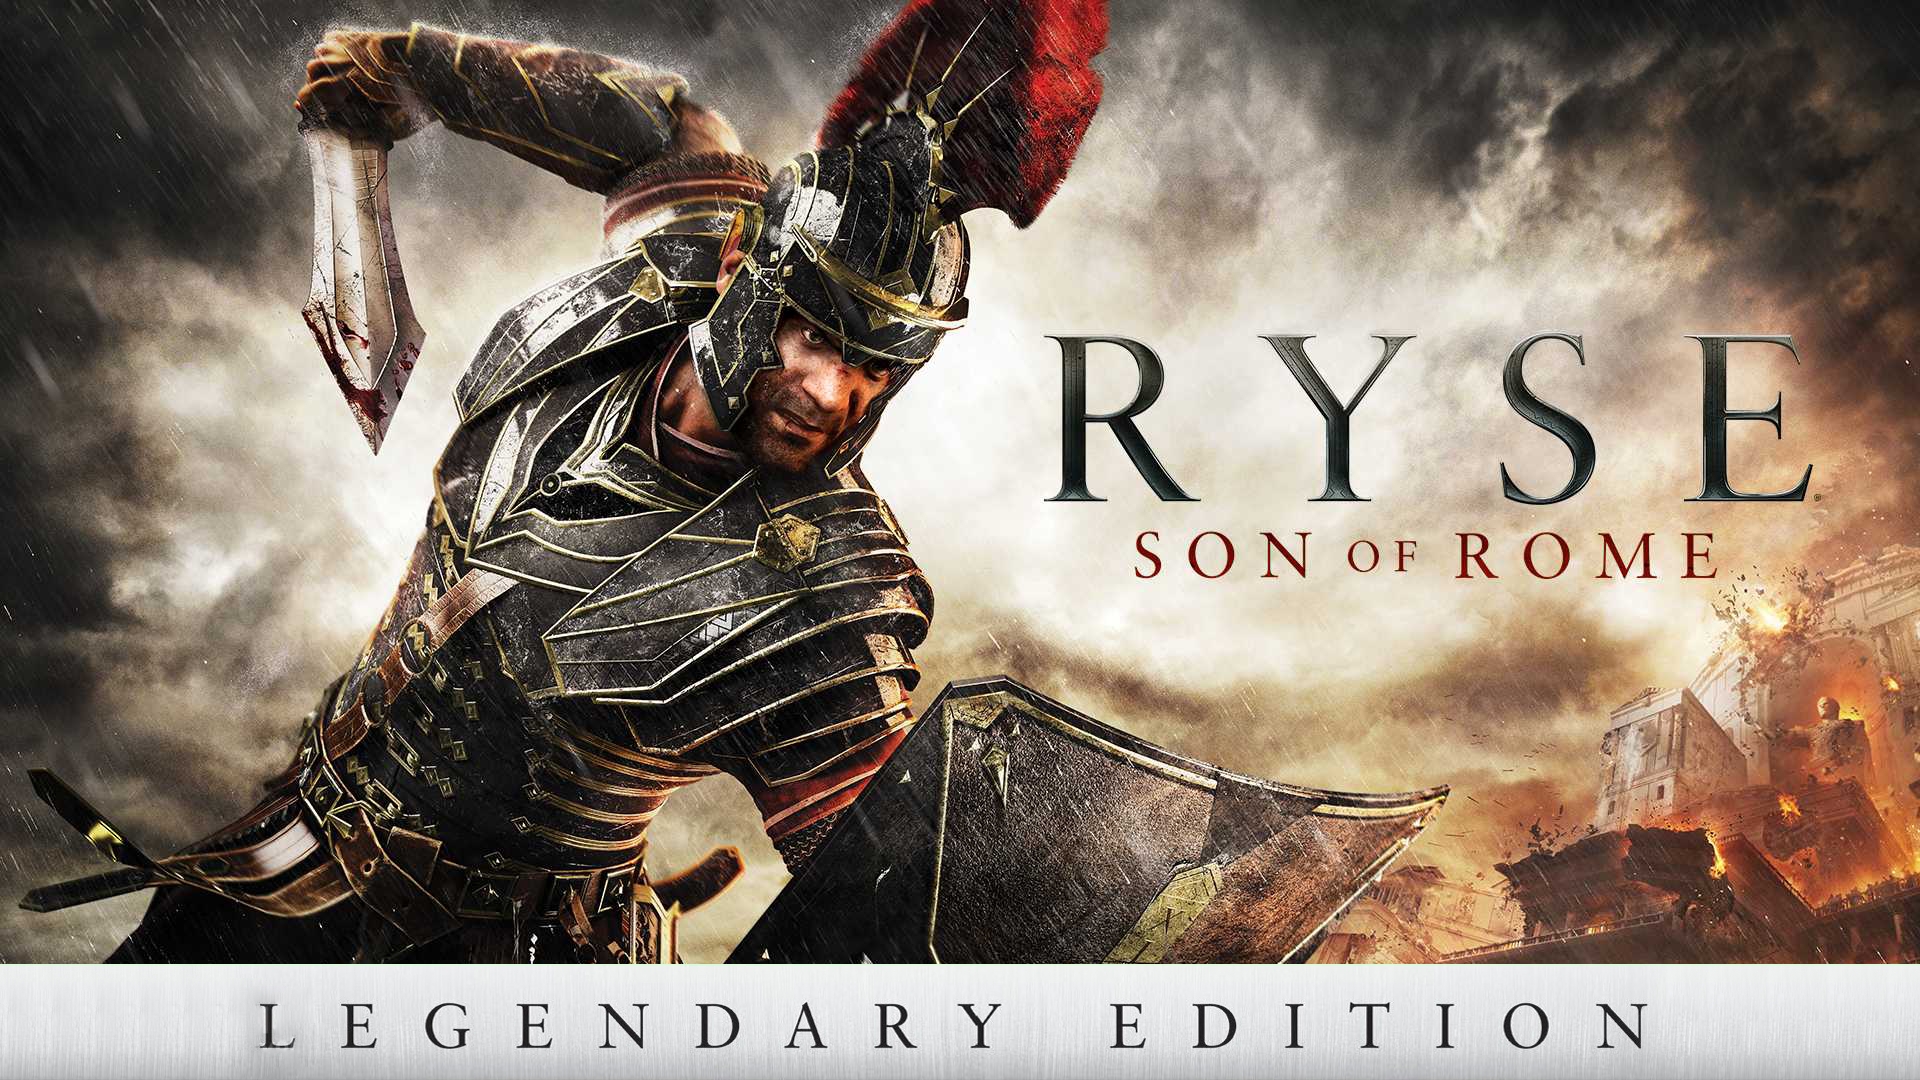 Ryse: Son of Rome - Legendary Edition (XBox One)